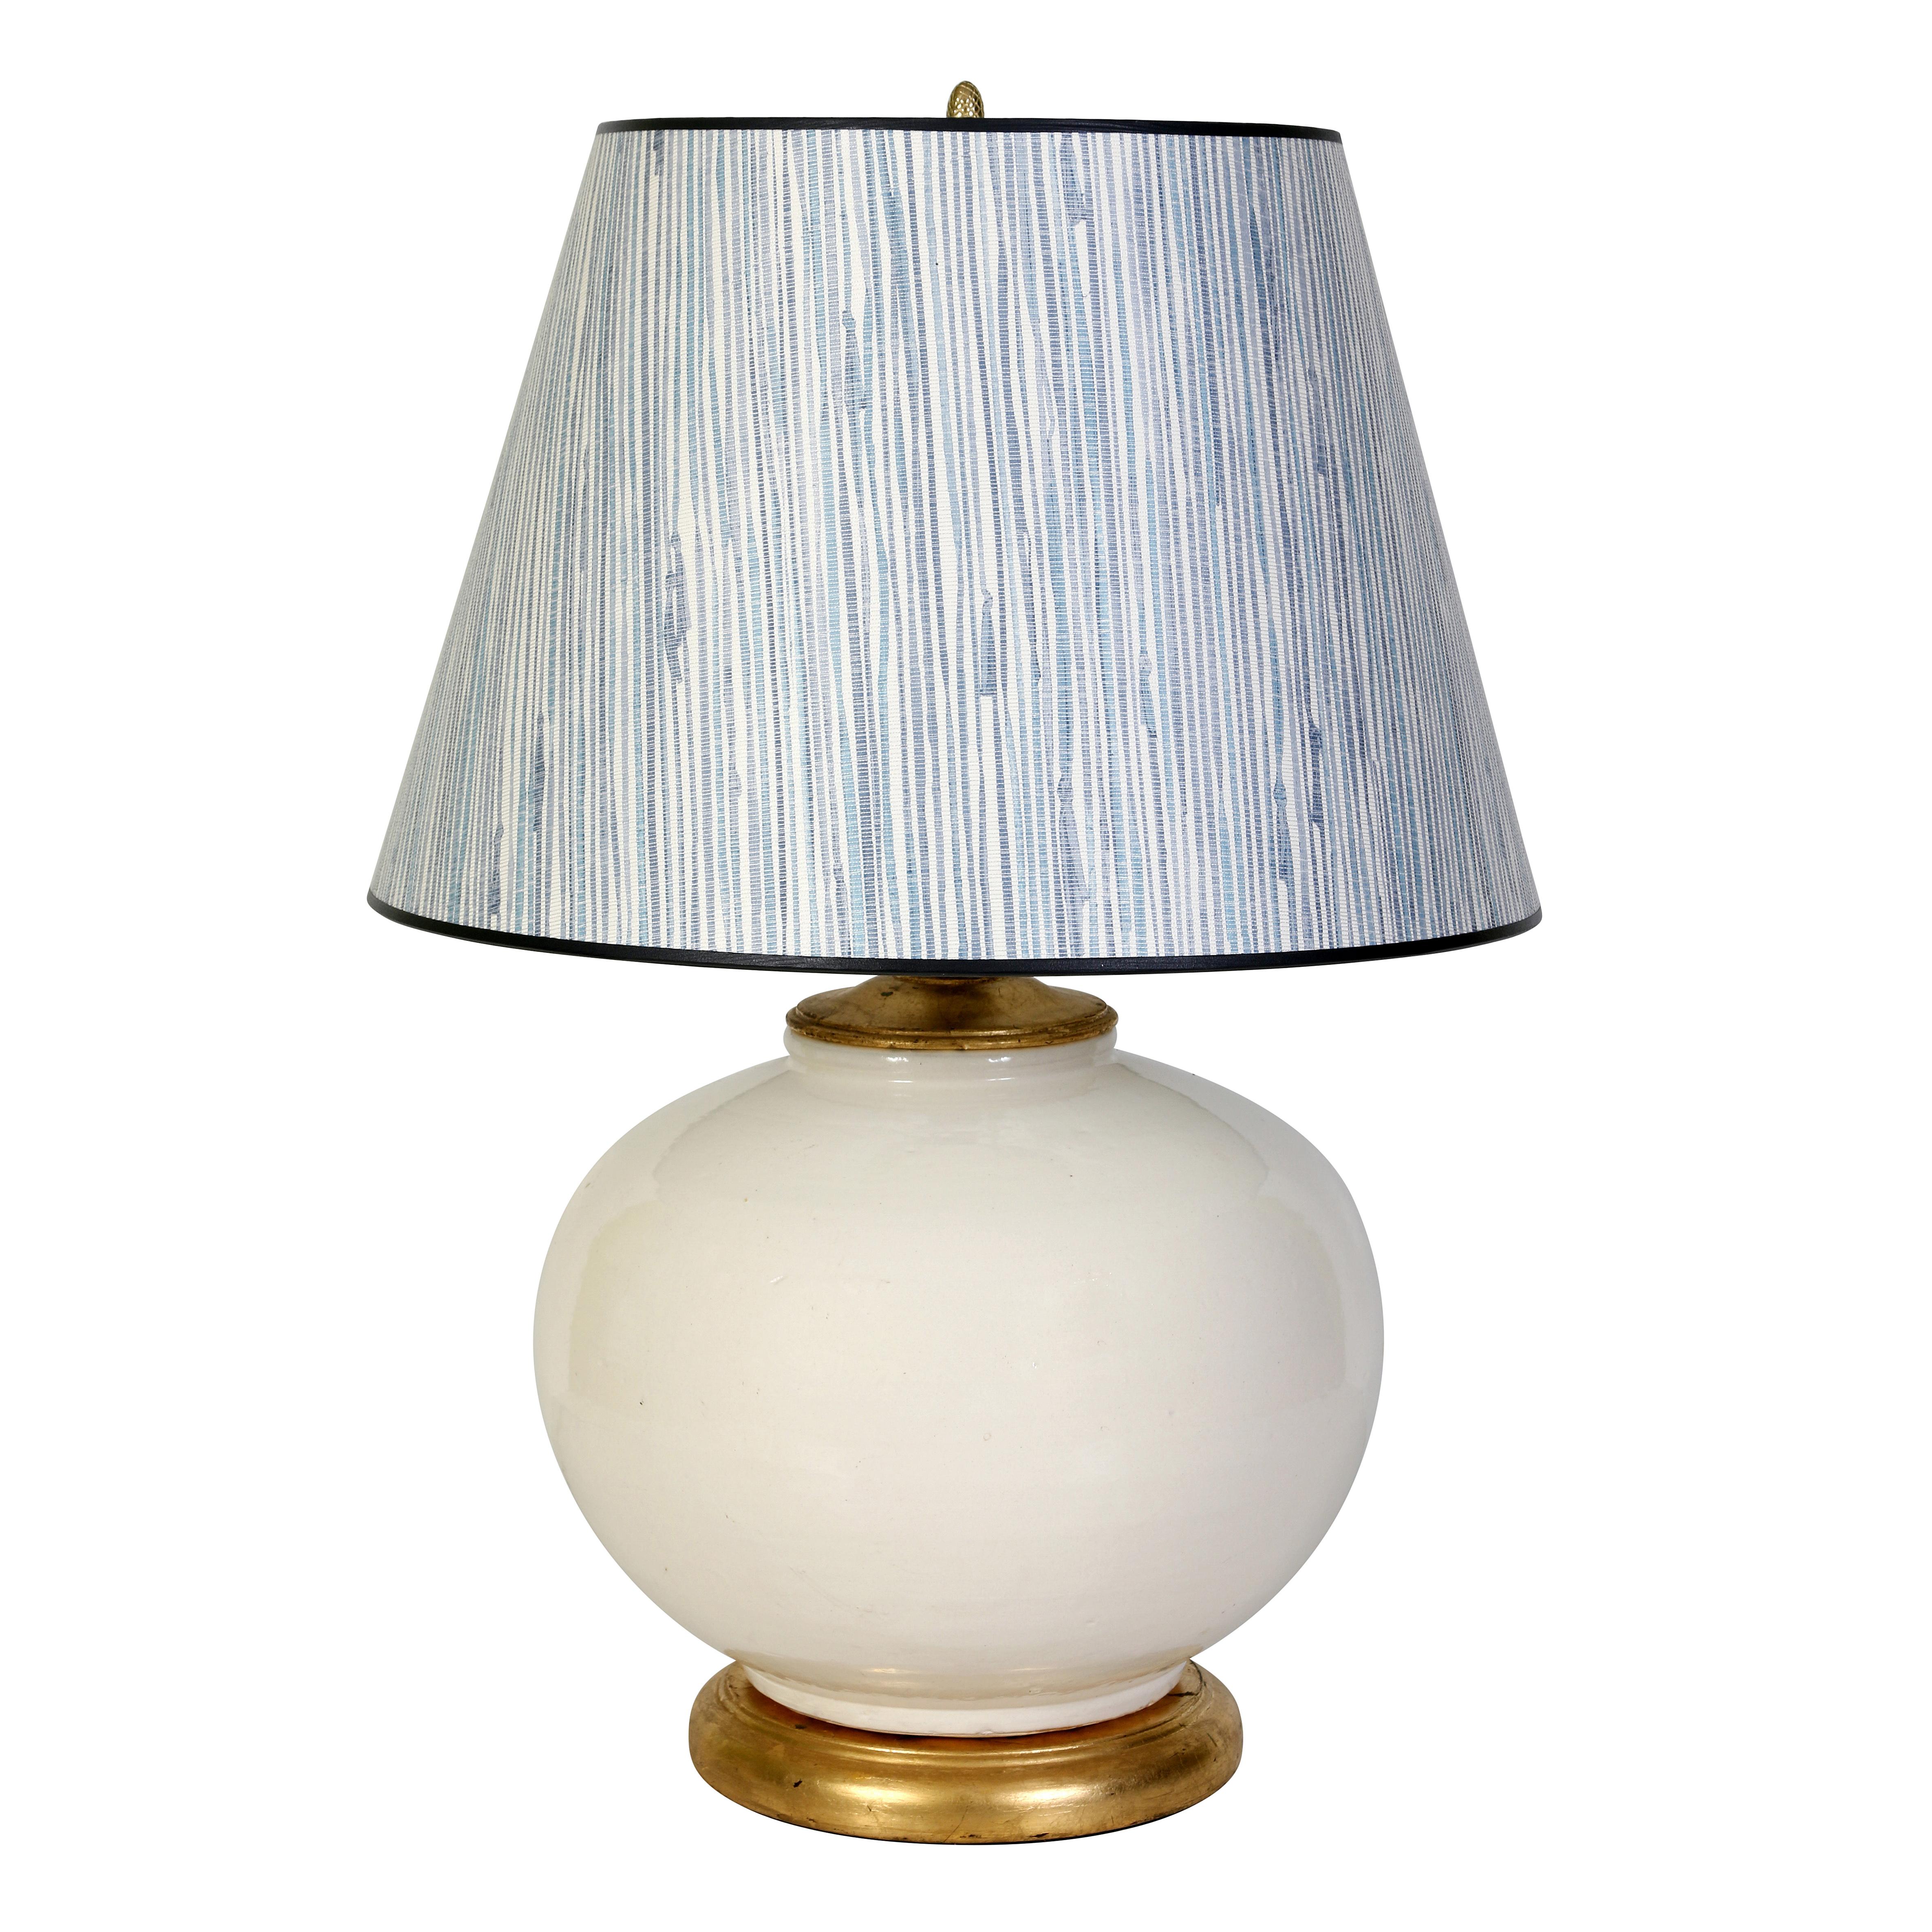 These lamps in a creamy white glaze have a generous, round silhouette on a giltwood base, making them perfect for long console, on the ends of a sofa or on bedside tables or chests.  We have paired them in the shop with blue and white textured